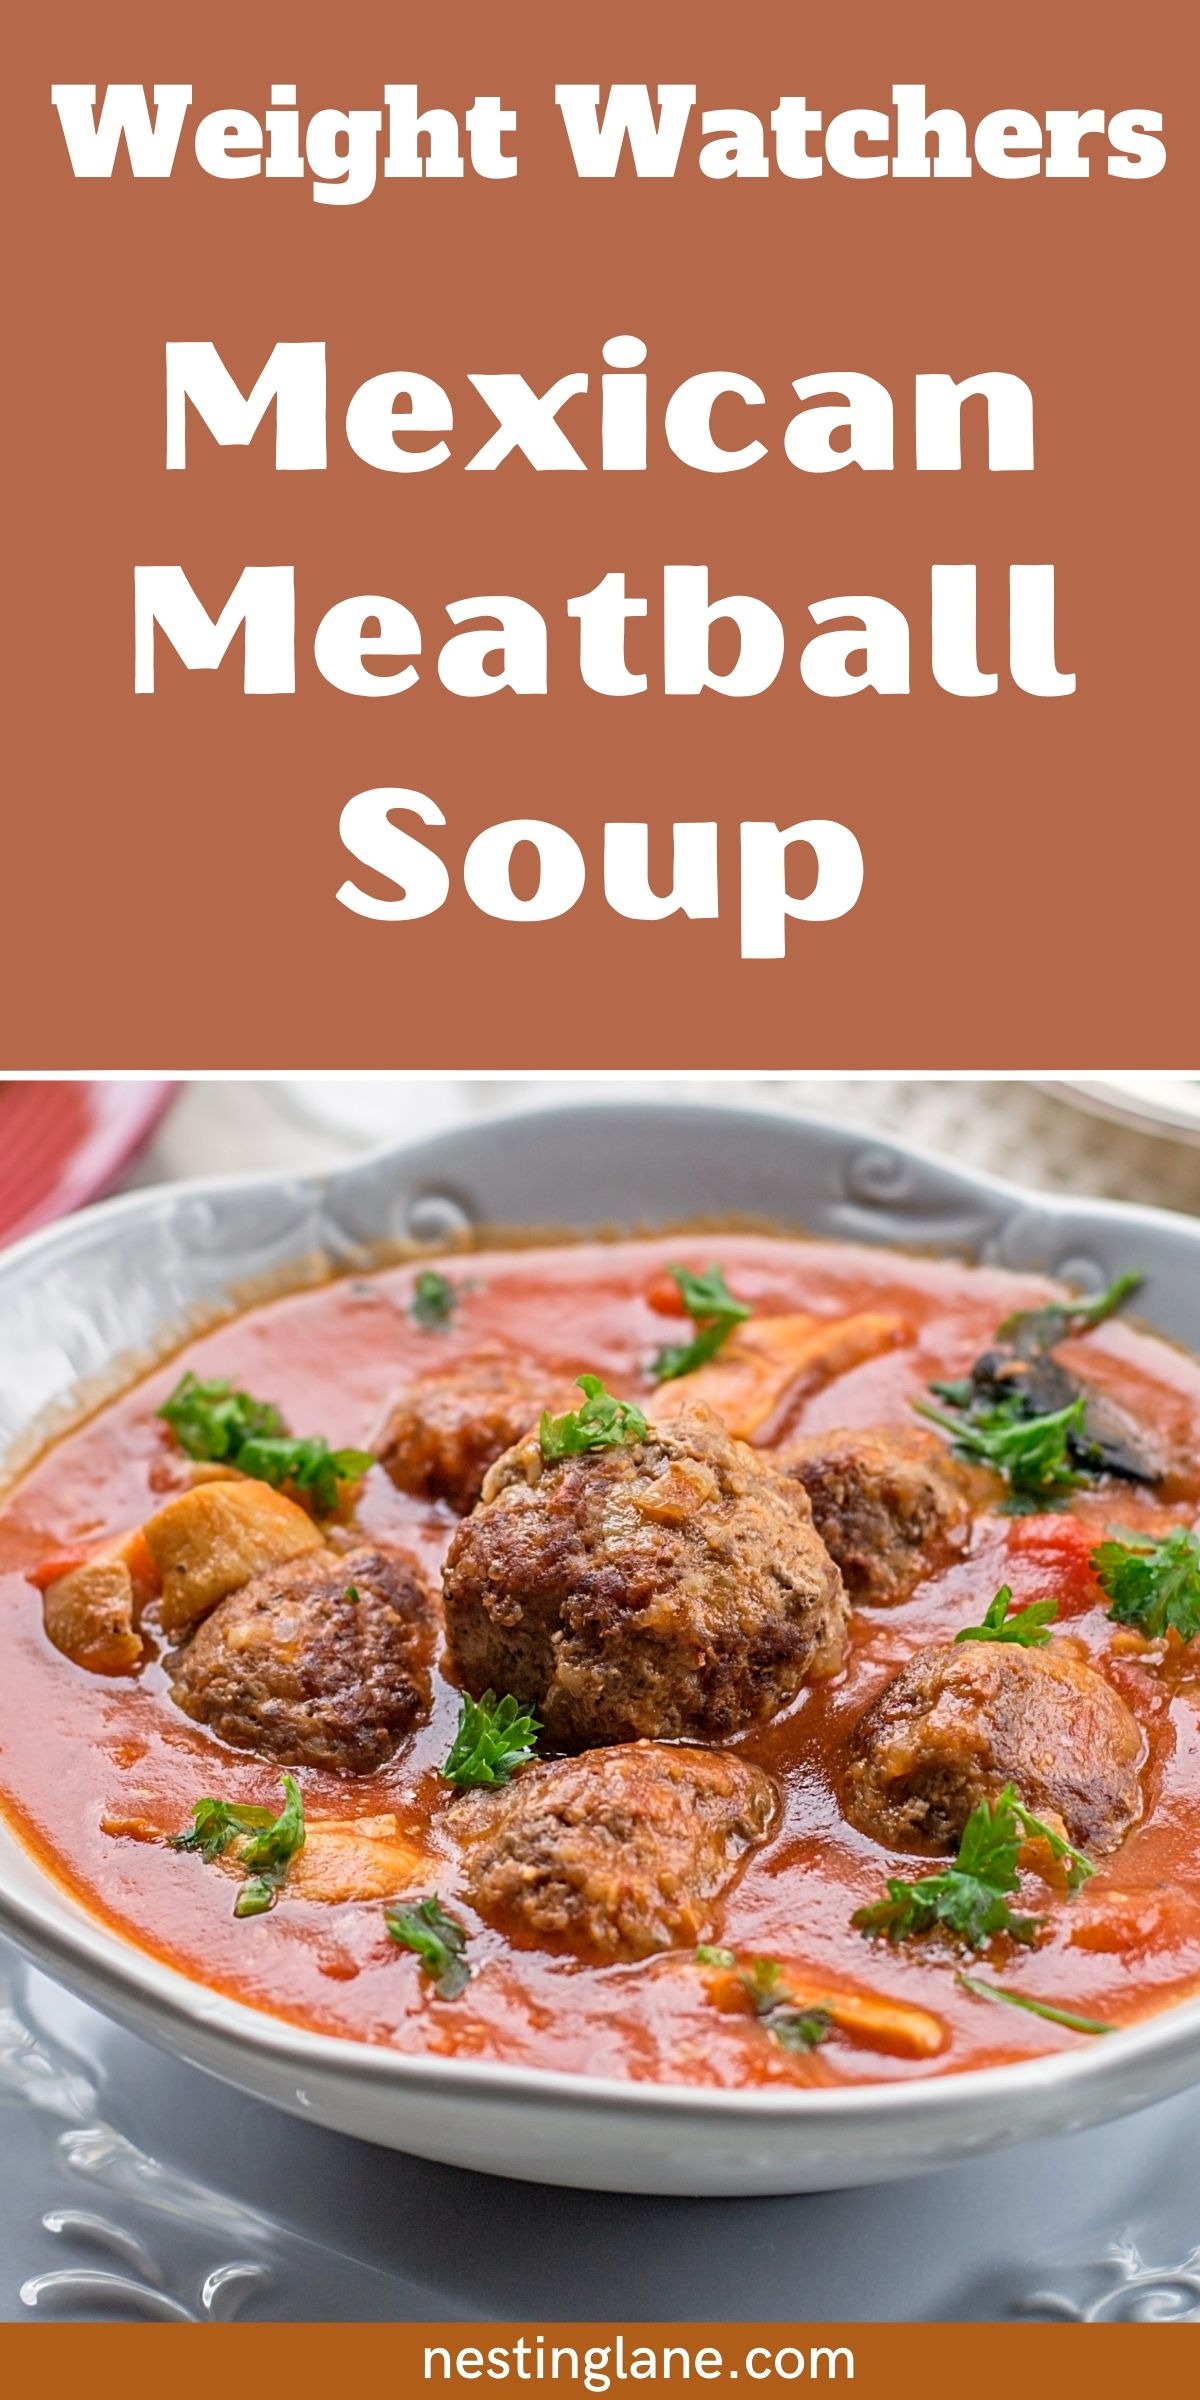 Graphic for Pinterest of Weight Watchers Mexican Meatball Soup Recipe.